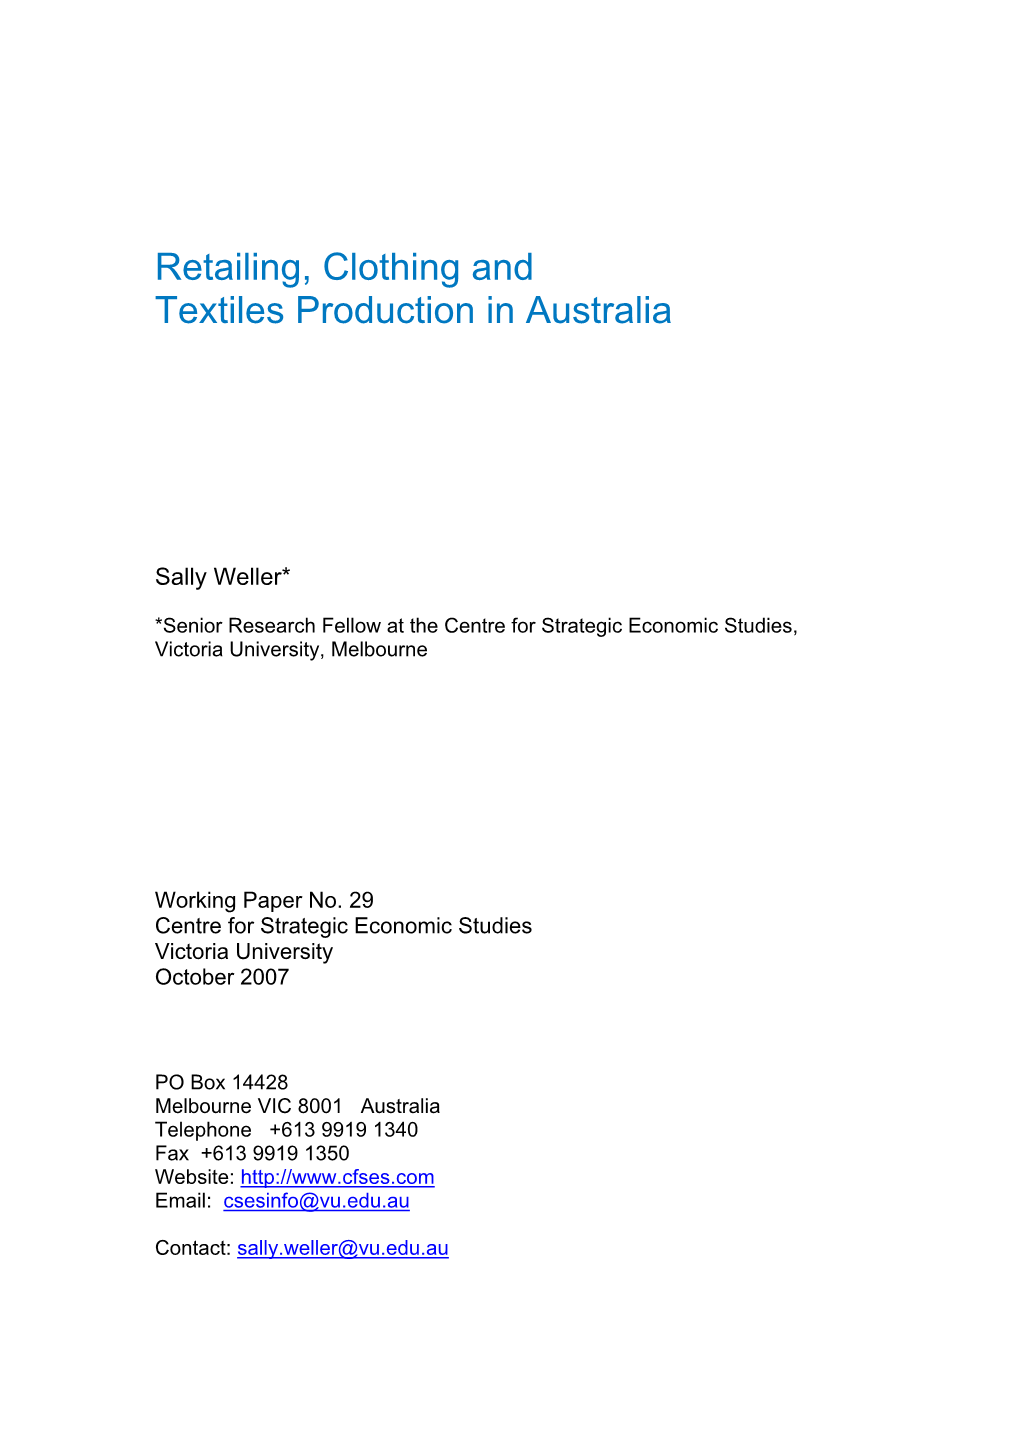 Retailing, Clothing and Textiles Production in Australia